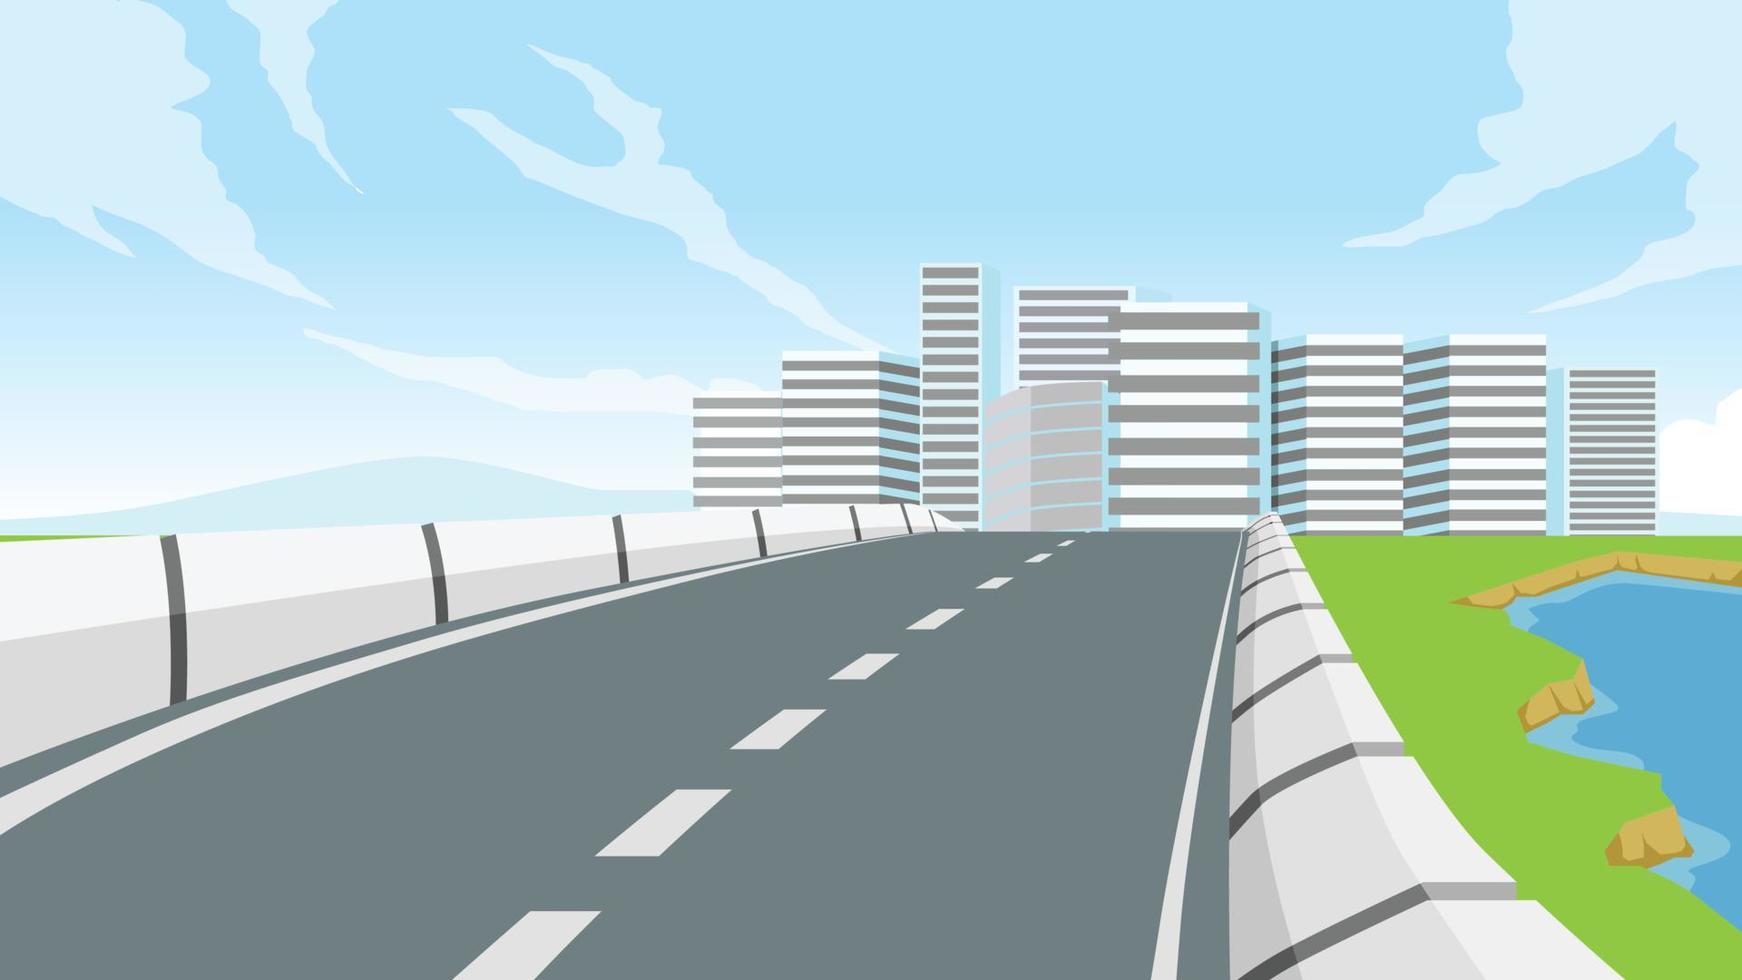 Vector cartoon landscape of asphalt road and road edge barrier. Path is straight ahead. Beside with meadow and river. Background has a large building under blue sky with free space.